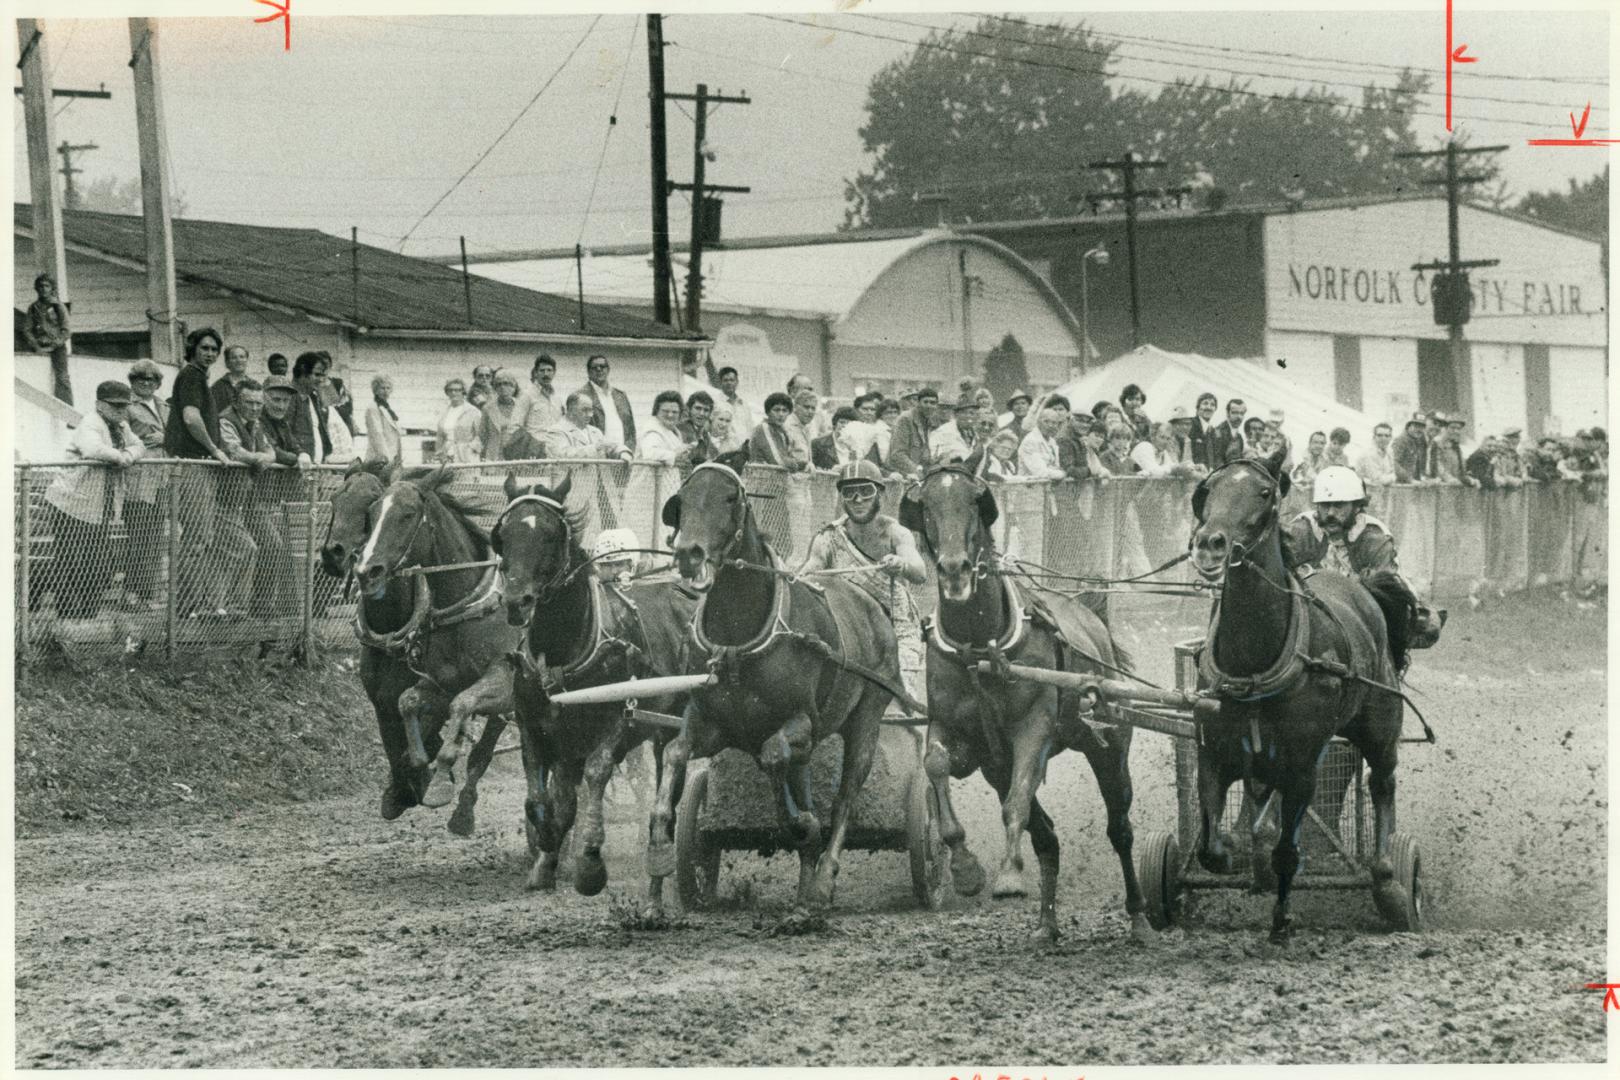 Norfolk fair -- 139 years of tradition